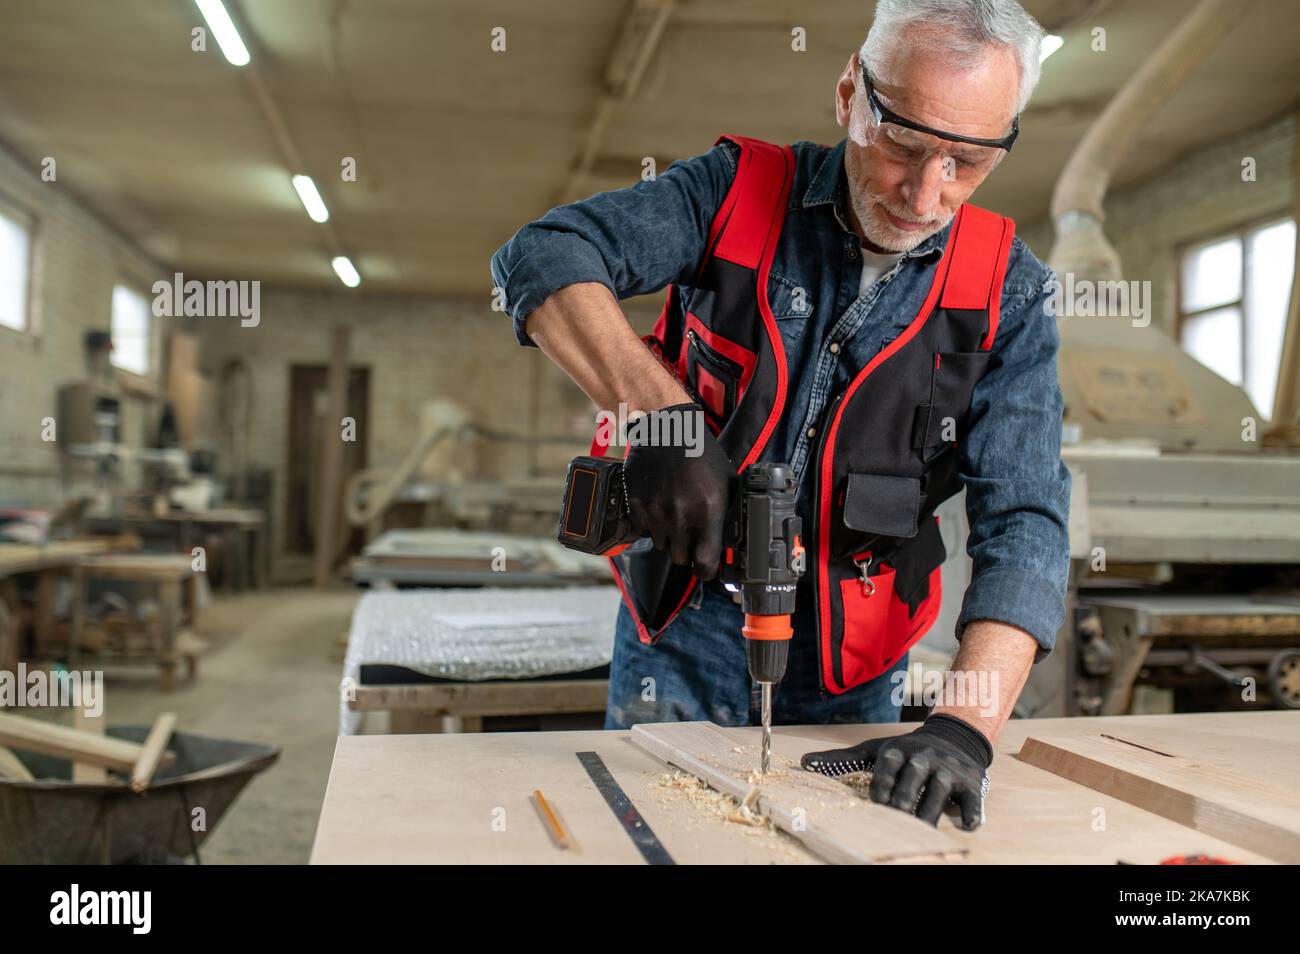 Craft person drlling wood in the workshop Stock Photo